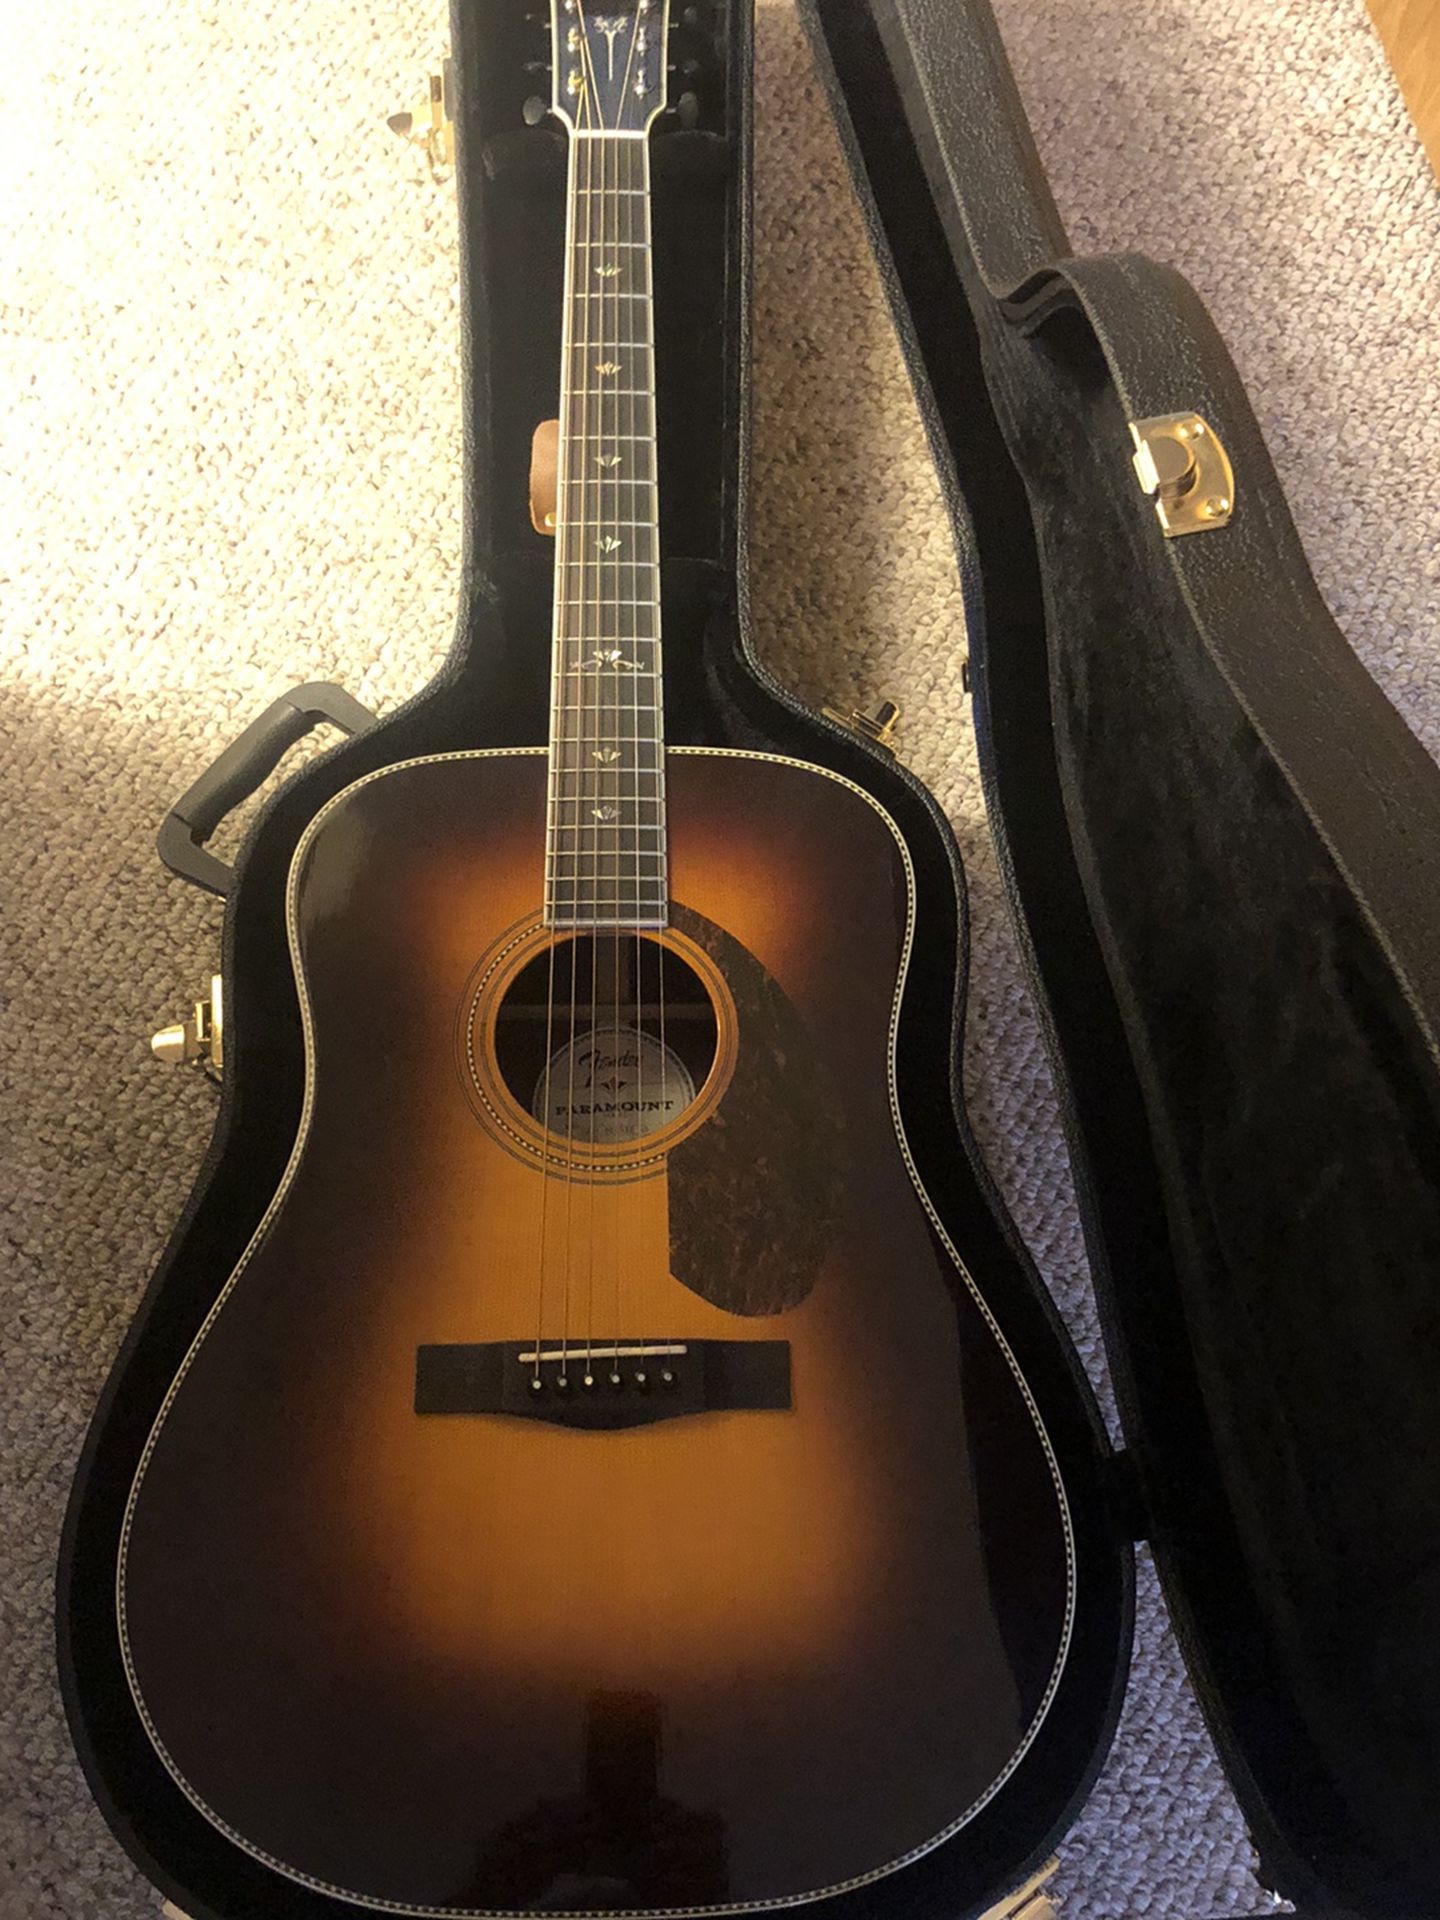 Fender Paramount PM1 Deluxe Acoustic Electric Guitar